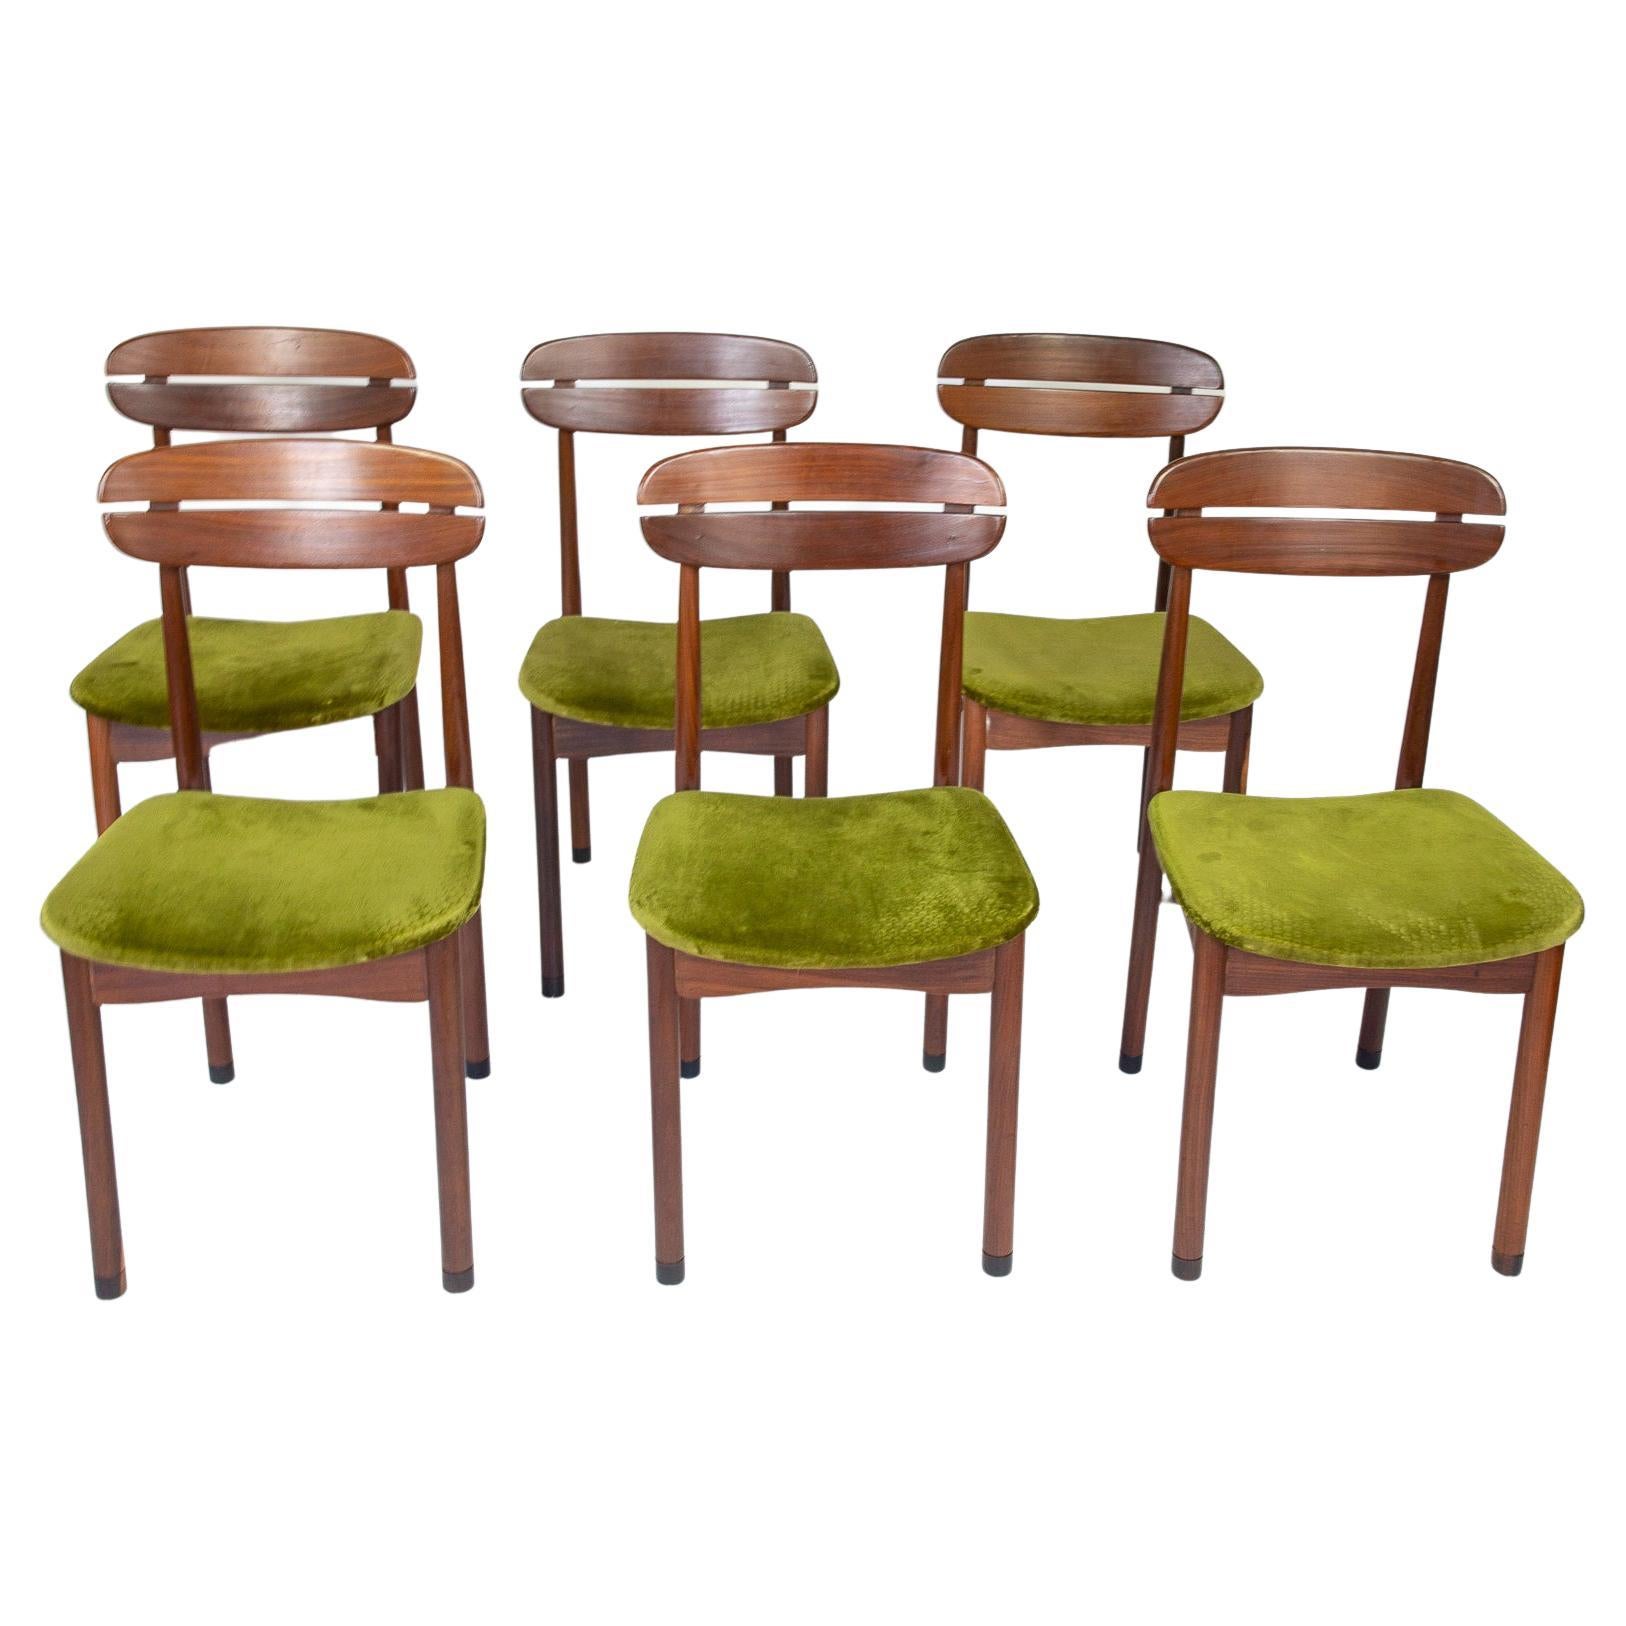 Mid Century Modern Dining Chairs with Green Velvet Upholstery, Set of 6, 1950s